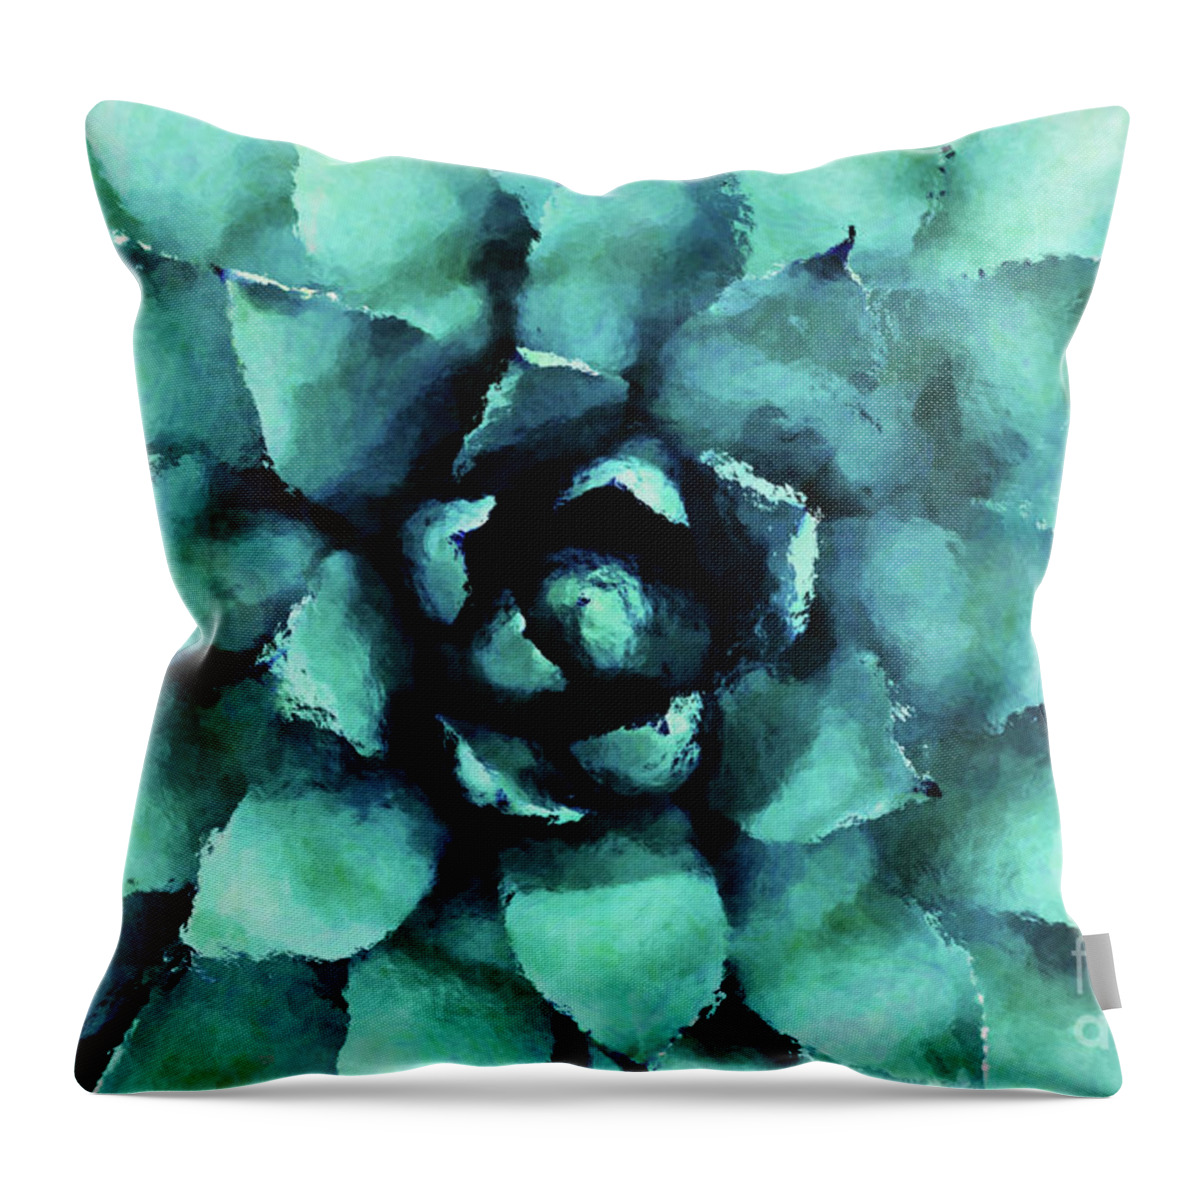 Succulent Throw Pillow featuring the digital art Turquoise Succulent Plant by Phil Perkins